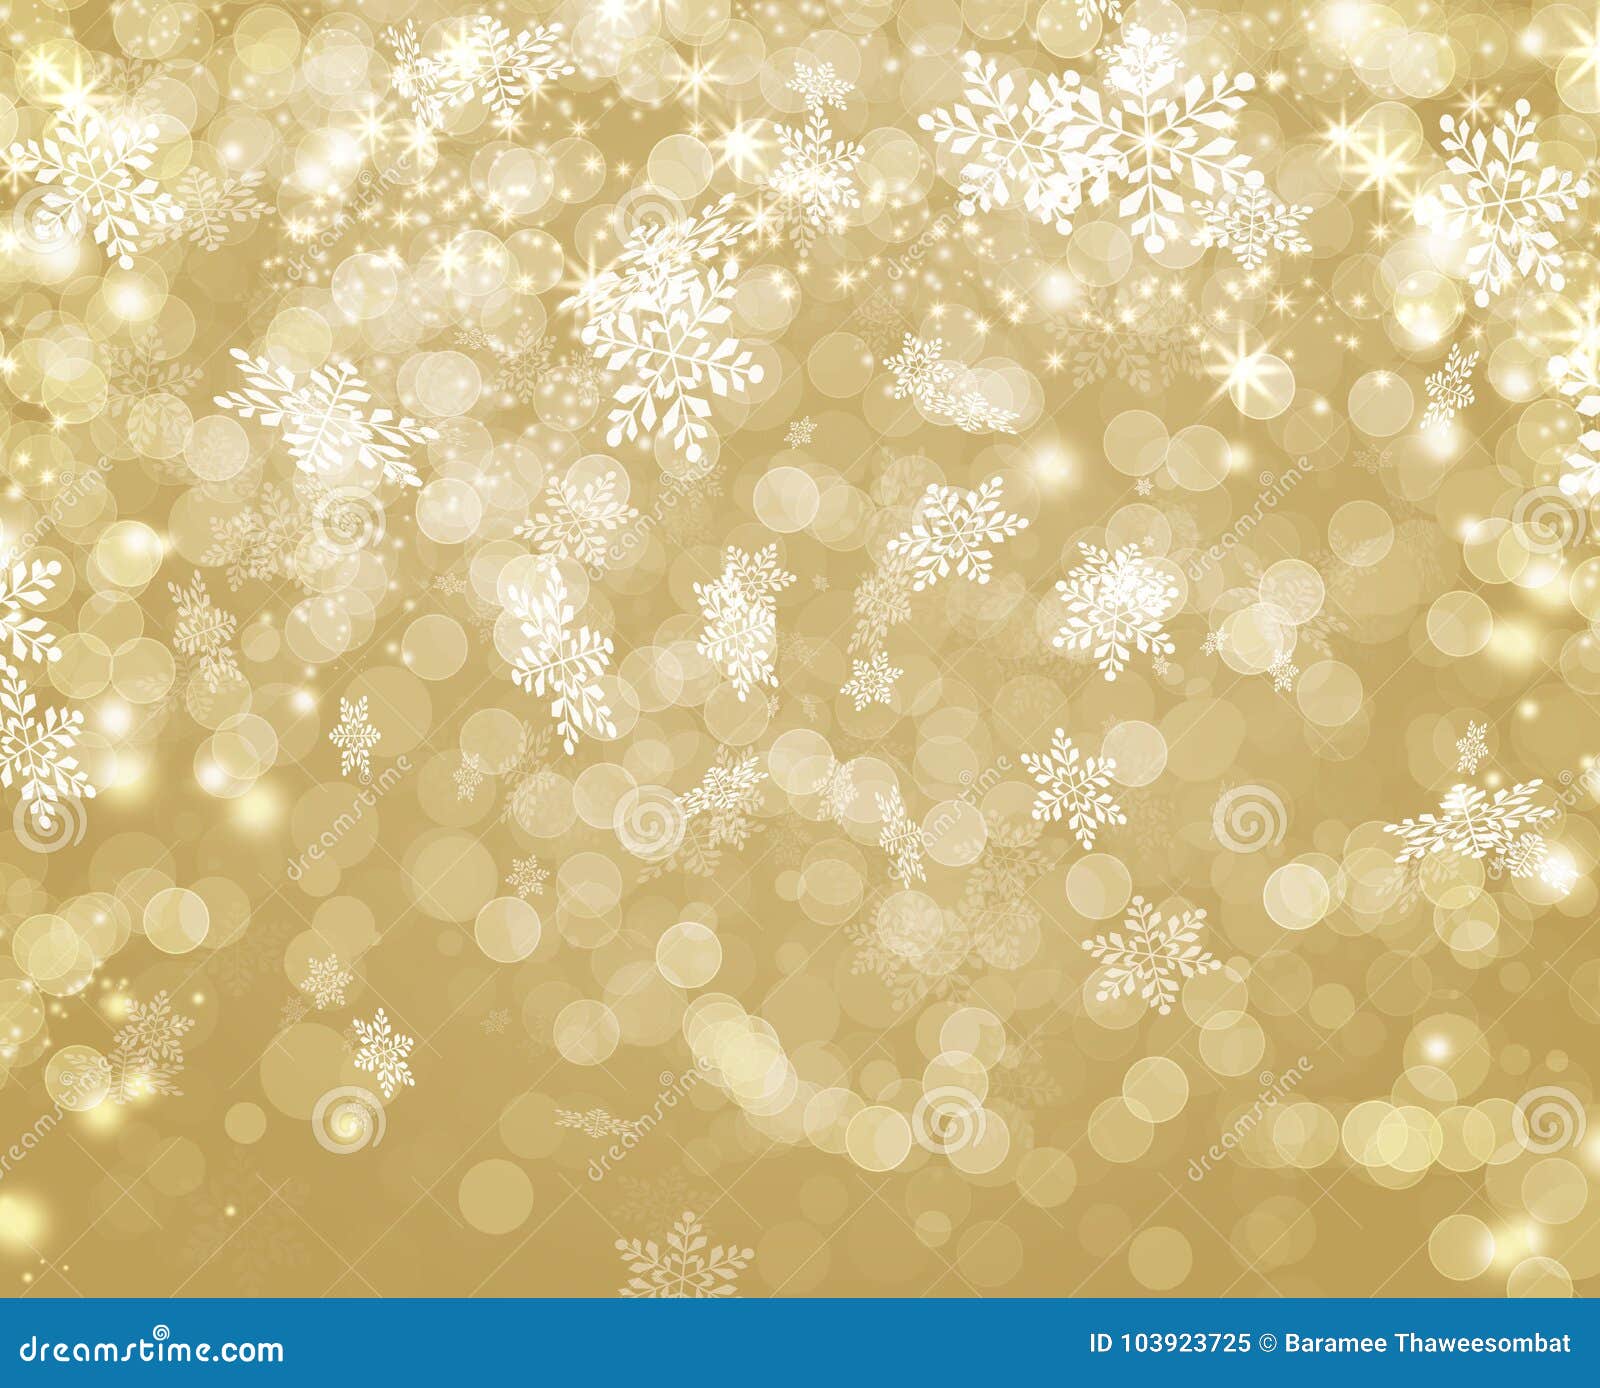 golden lights decorated with white bokeh snowflake ans stars christmas